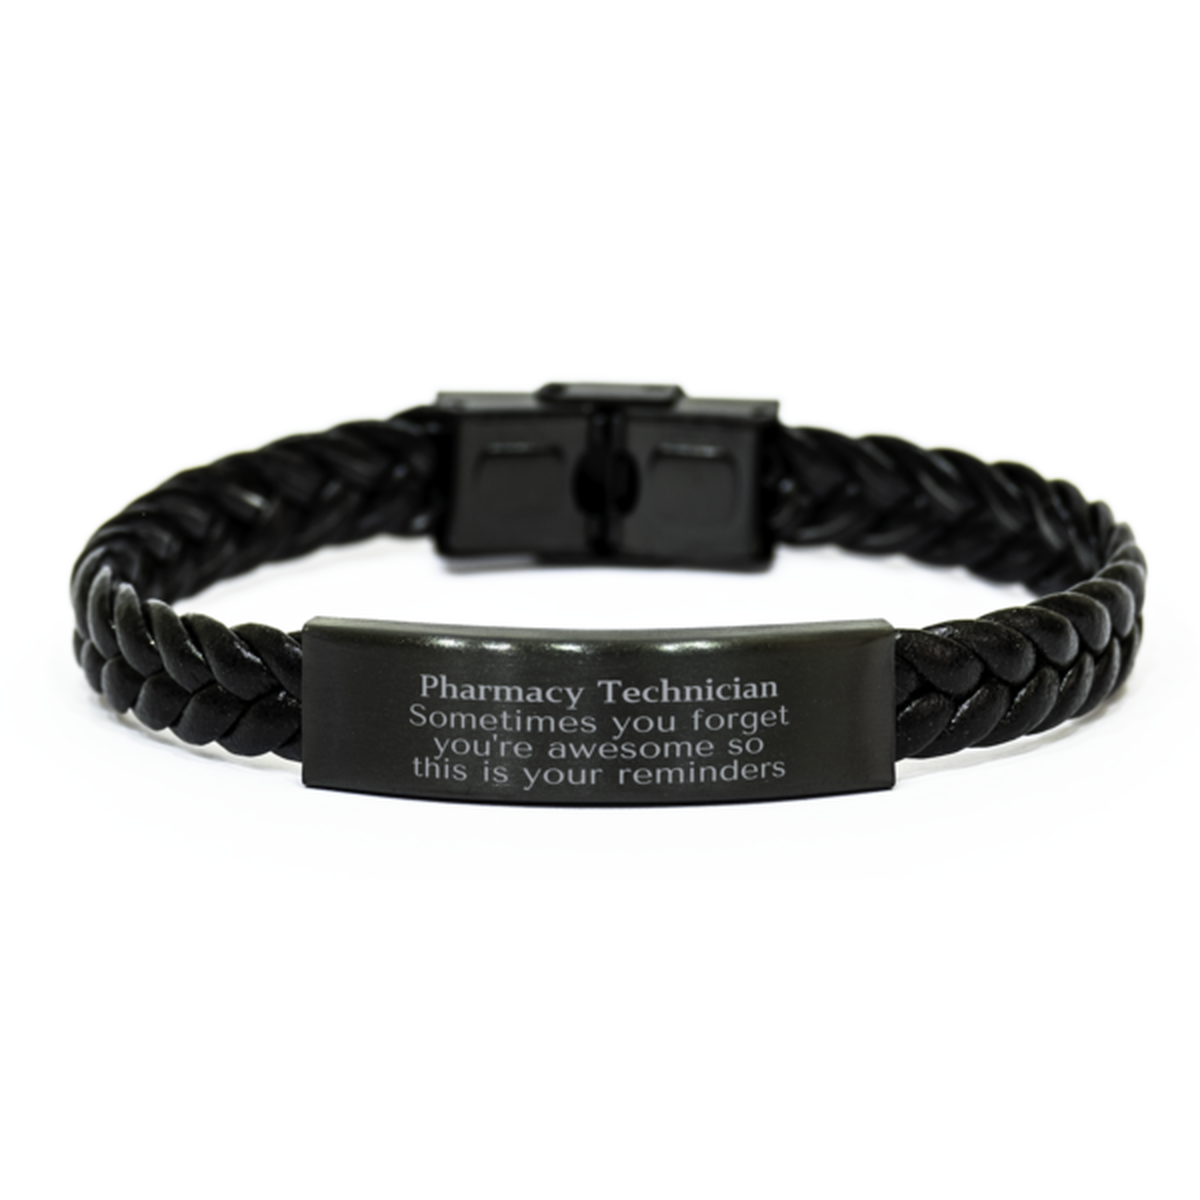 Sentimental Pharmacy Technician Braided Leather Bracelet, Pharmacy Technician Sometimes you forget you're awesome so this is your reminders, Graduation Christmas Birthday Gifts for Pharmacy Technician, Men, Women, Coworkers